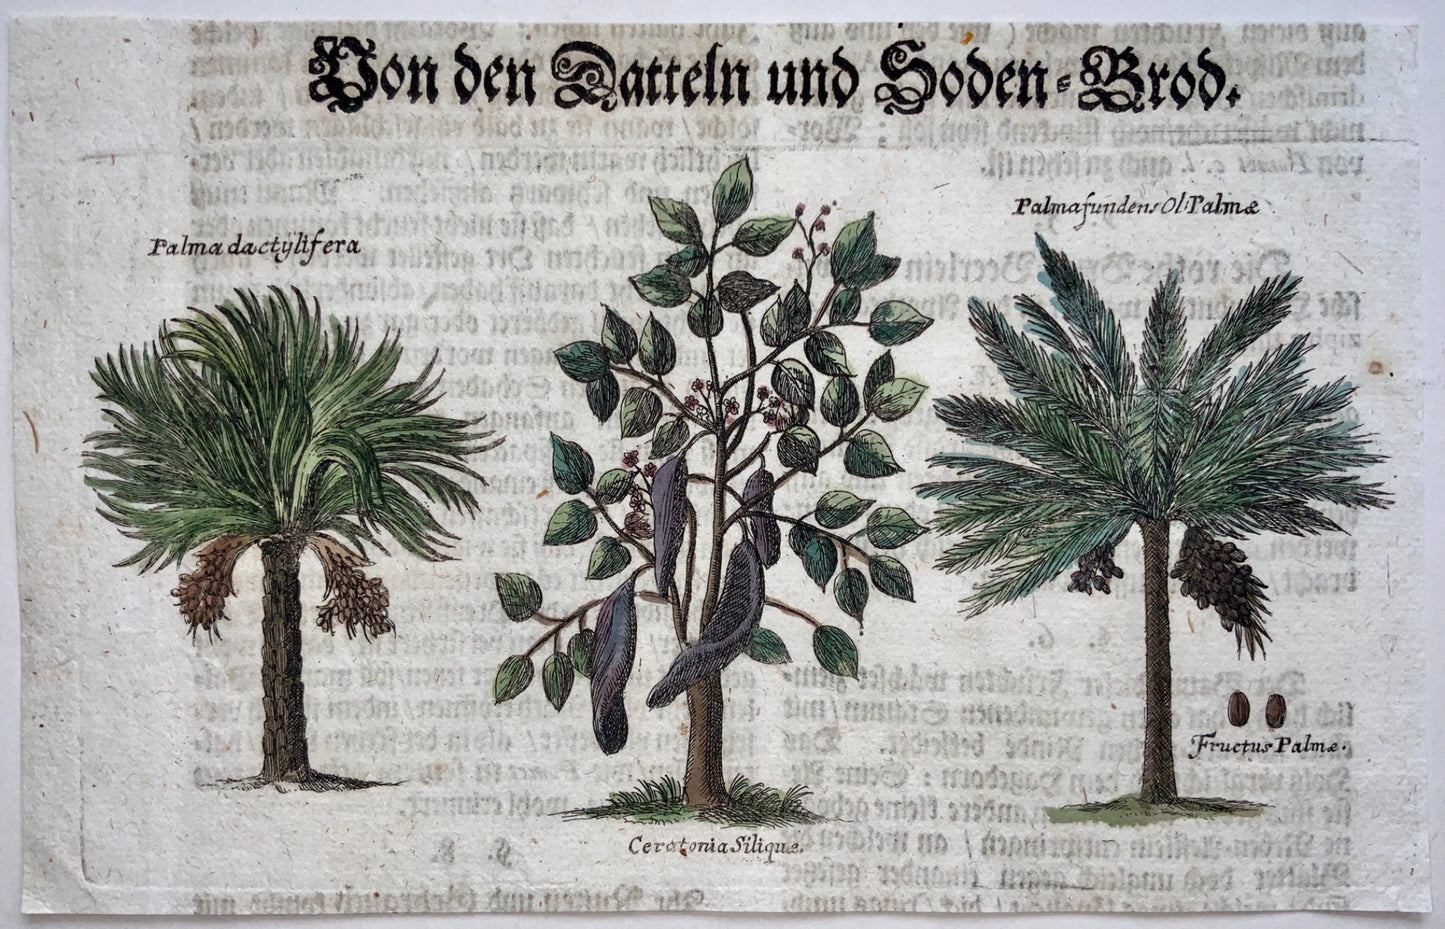 1704 DATES PALM TREES - M. Valentini (1657-1729) - Copper engraving - Botanical, agriculture